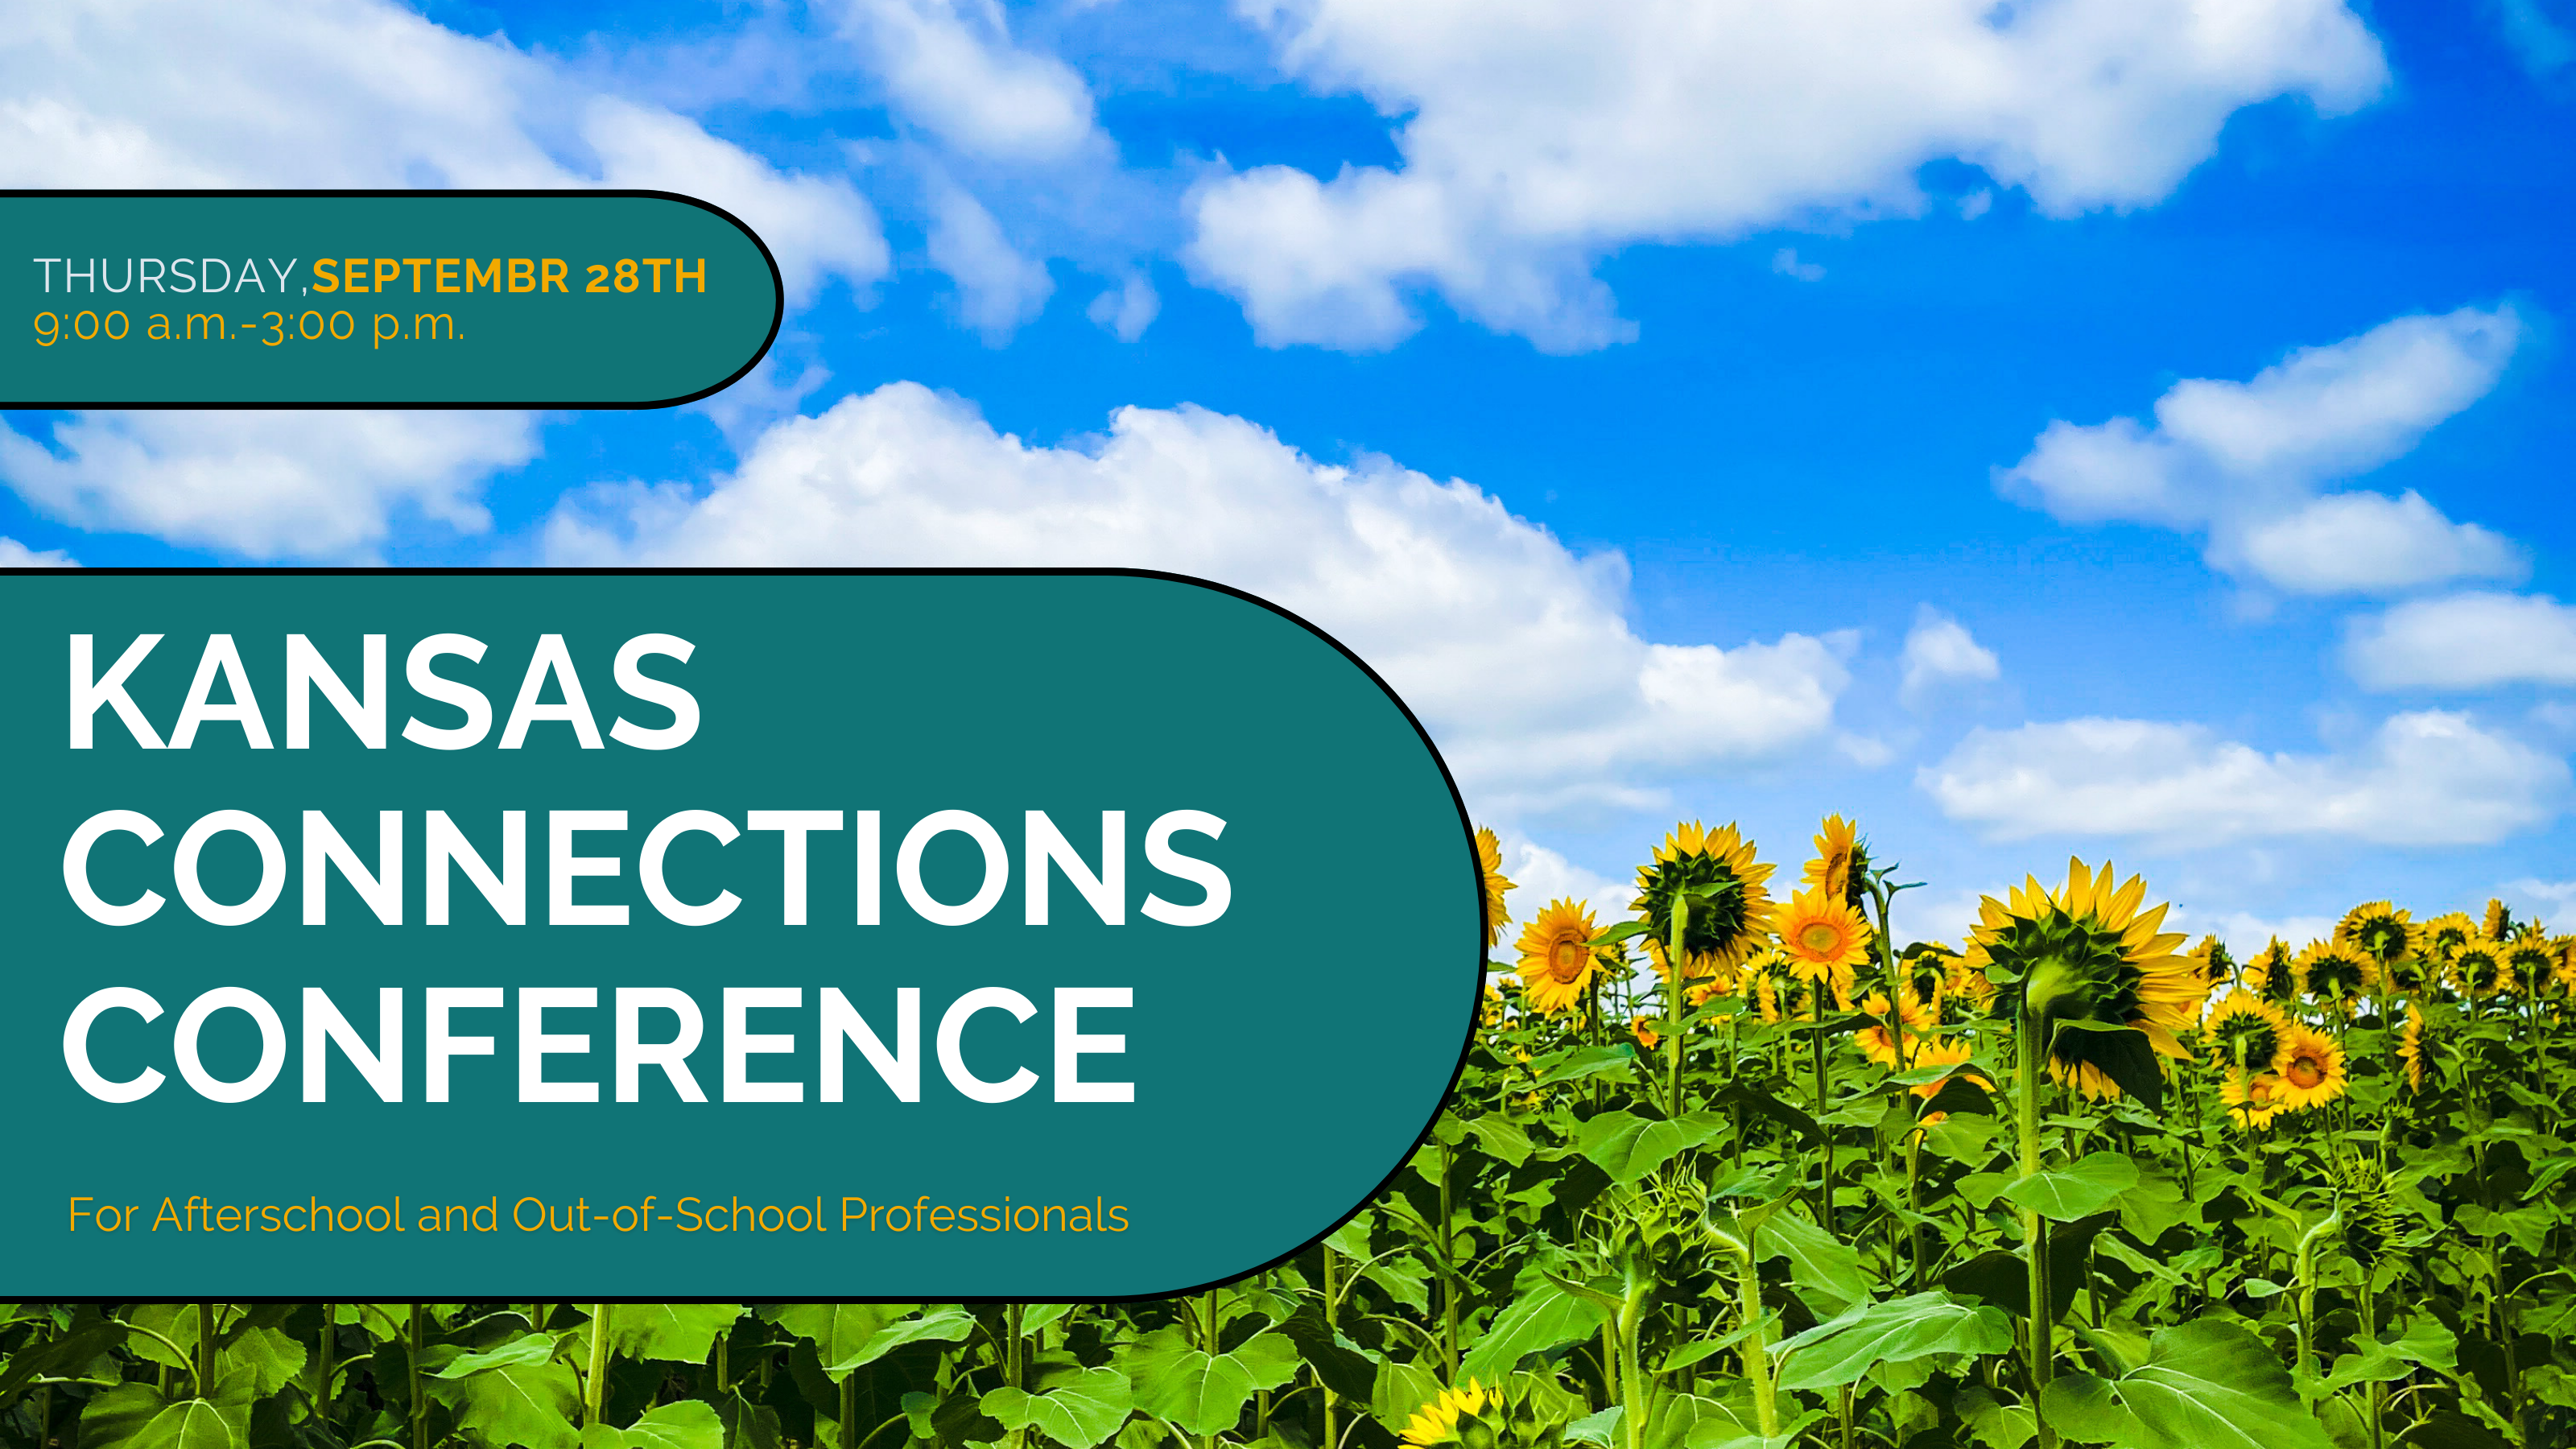 THURSDAY,SEPTEMBR 28th 9:00 a.m.-3:00 p.m. </p>
<p>KANSAS<br />
CONNECTIONS<br />
CONFERENCE</p>
<p>For Afterschool and Out-of-School Professionals